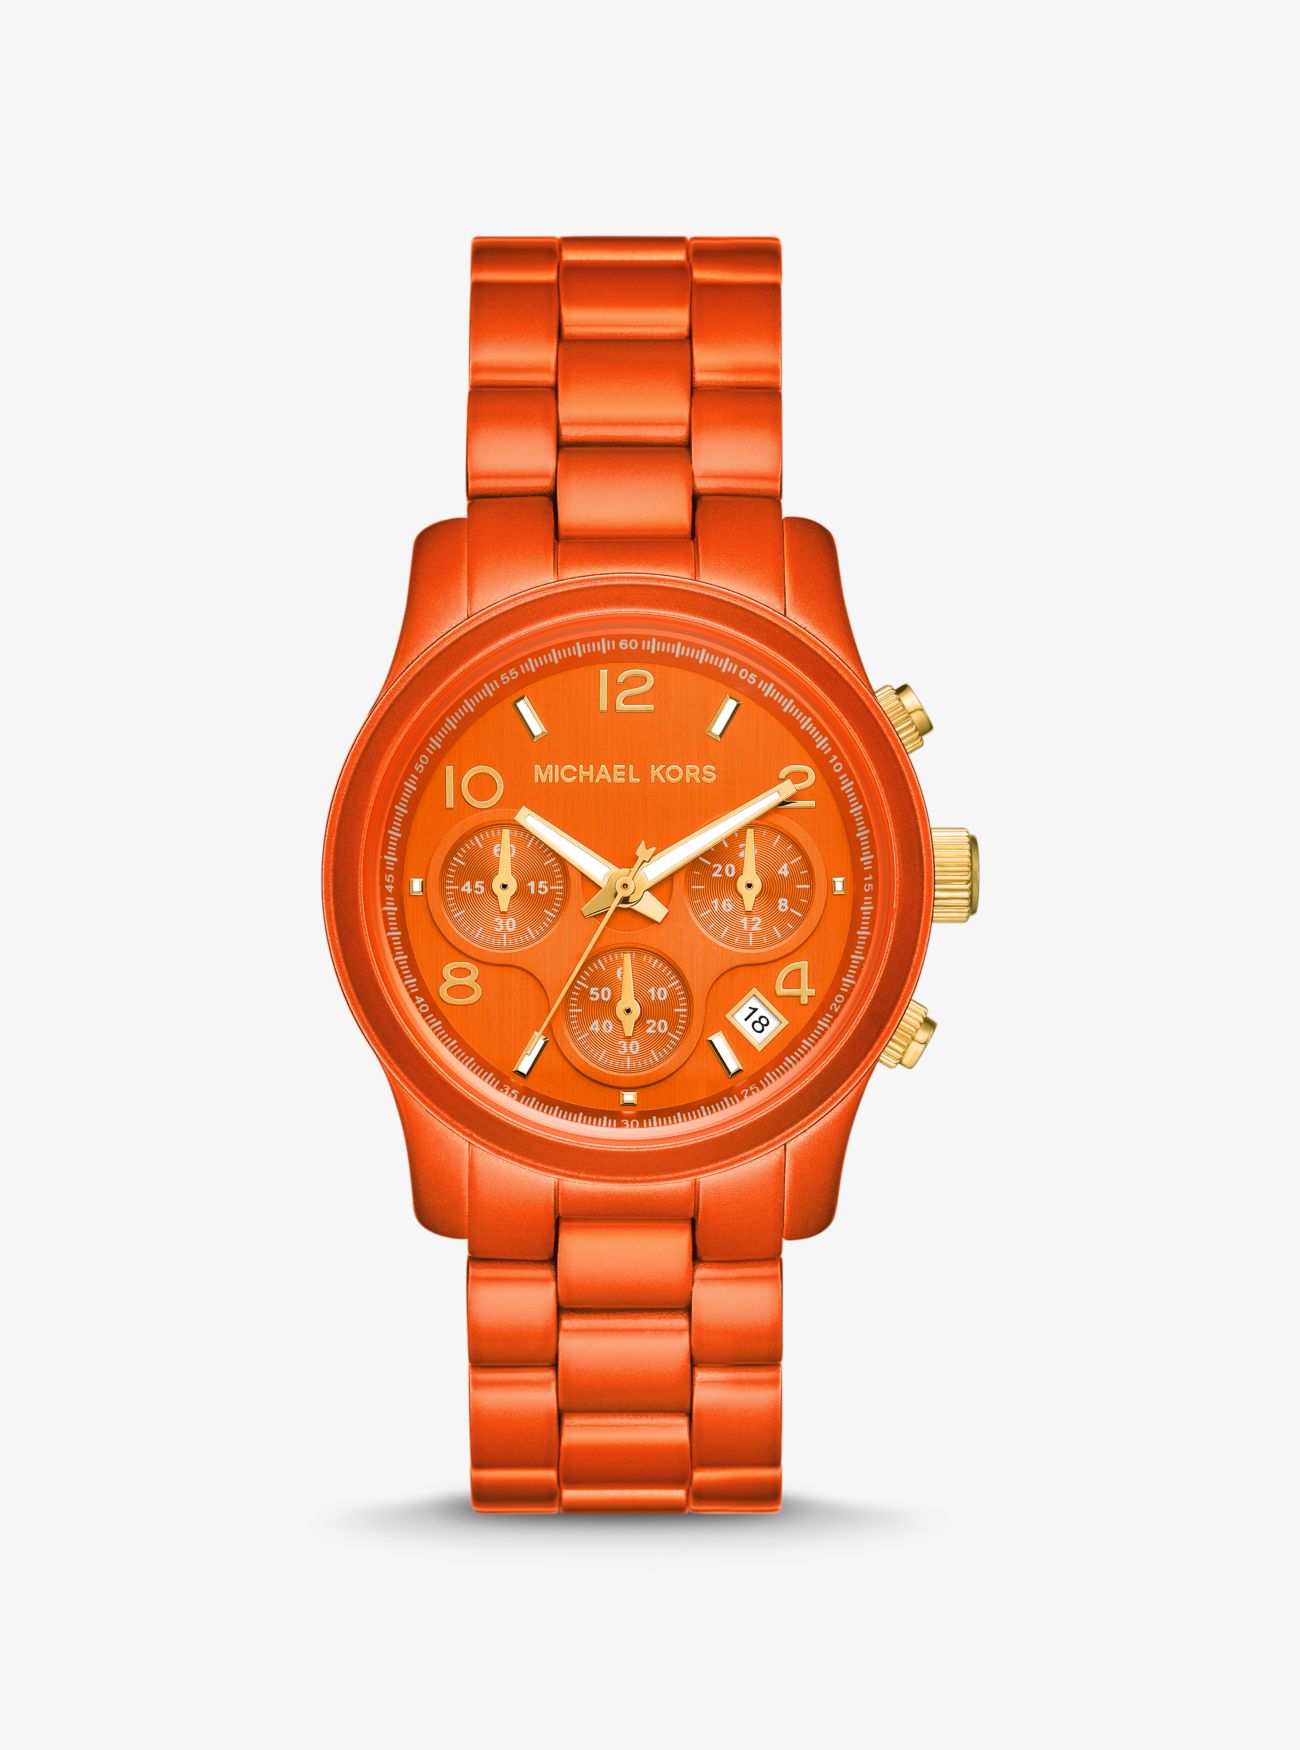 MK Limited-Edition Runway Orange-Tone Watch - Spiced Coral - Michael Kors